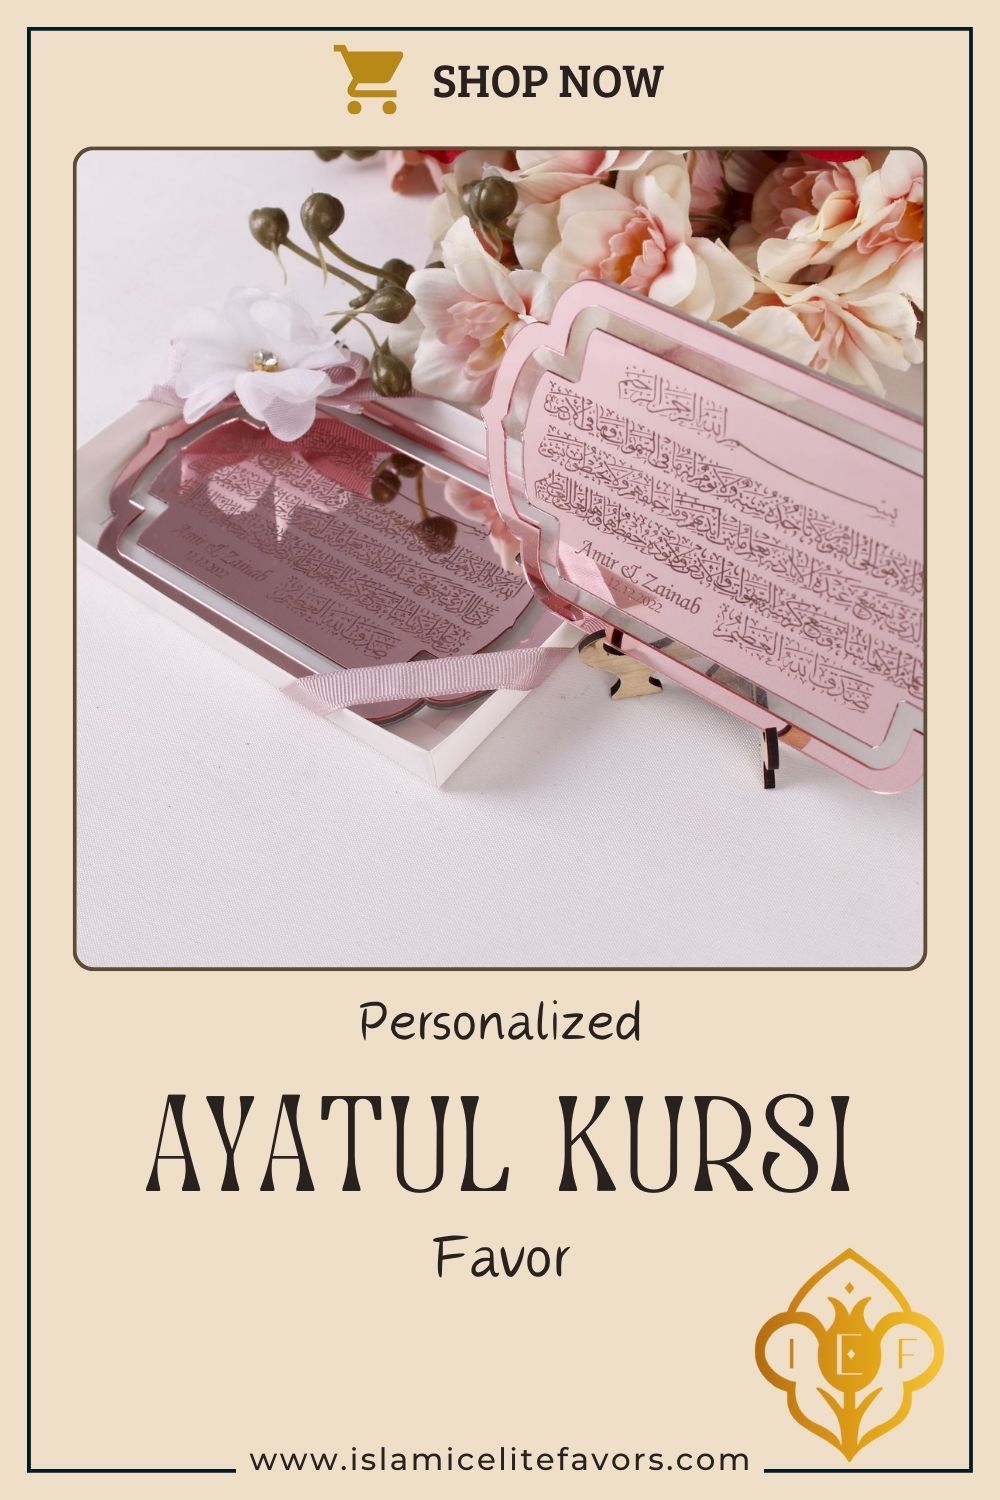 Personalized Wedding Favor Large Ayatul Kursi on Stand Rose Gold Plexi - Islamic Elite Favors is a handmade gift shop offering a wide variety of unique and personalized gifts for all occasions. Whether you're looking for the perfect Ramadan, Eid, Hajj, wedding gift or something special for a birthday, baby shower or anniversary, we have something for everyone. High quality, made with love.